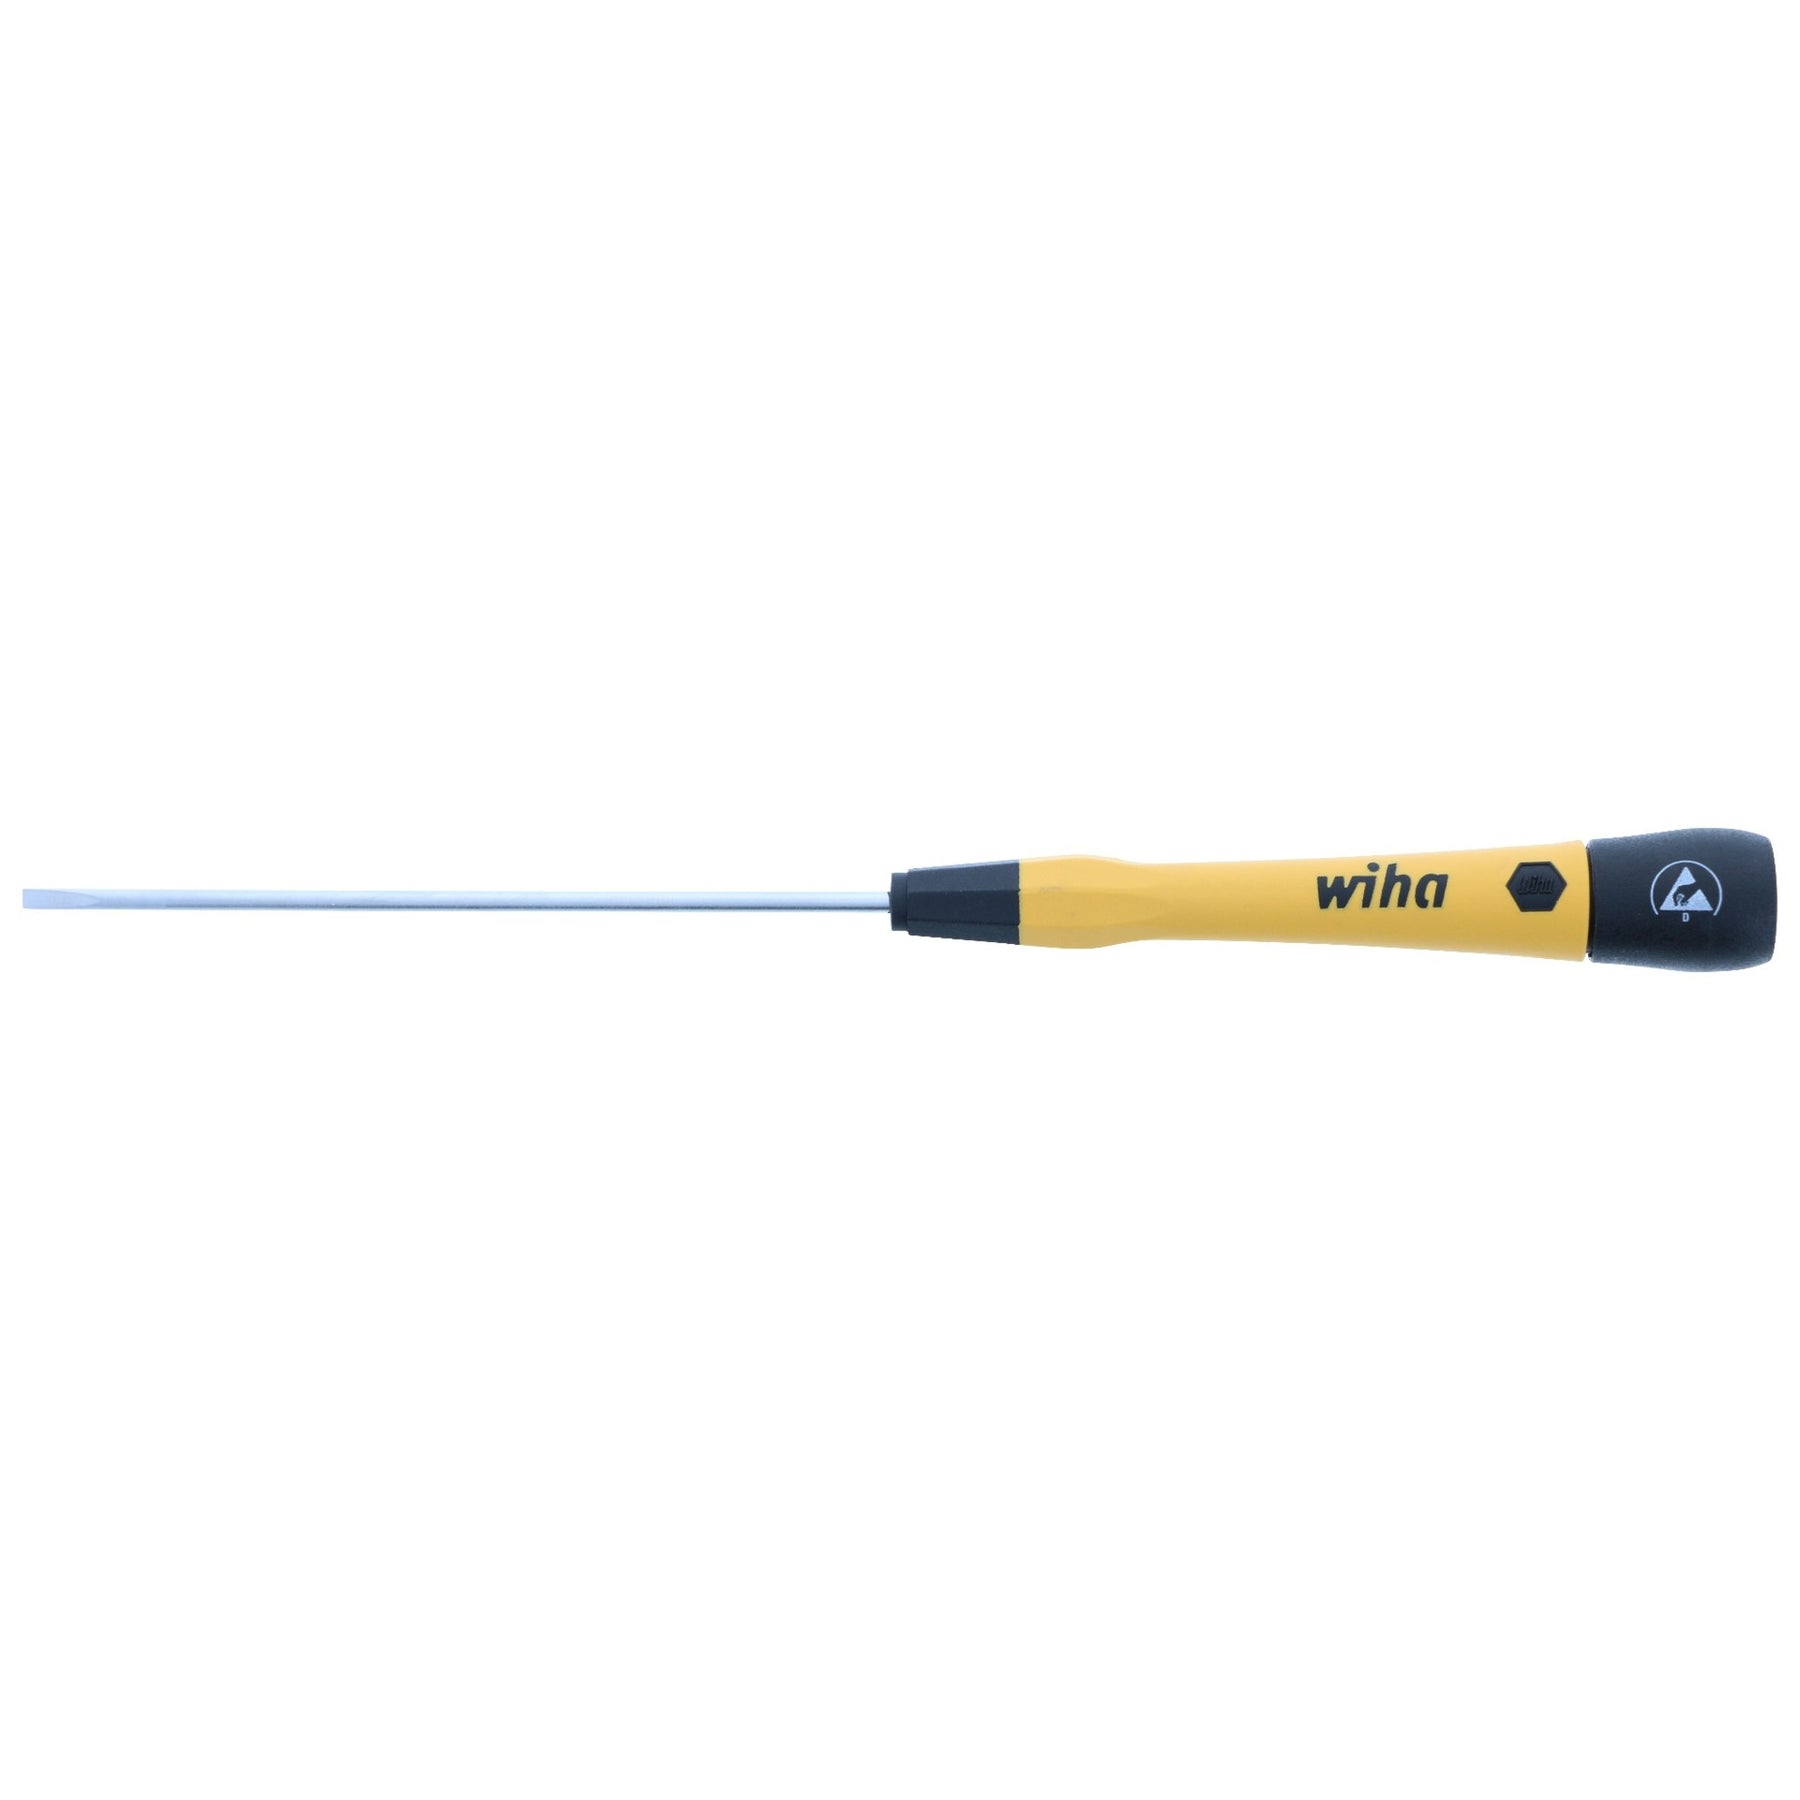 ESD Safe PicoFinish Precision Screwdriver - Slotted 2.5mm x 100mm